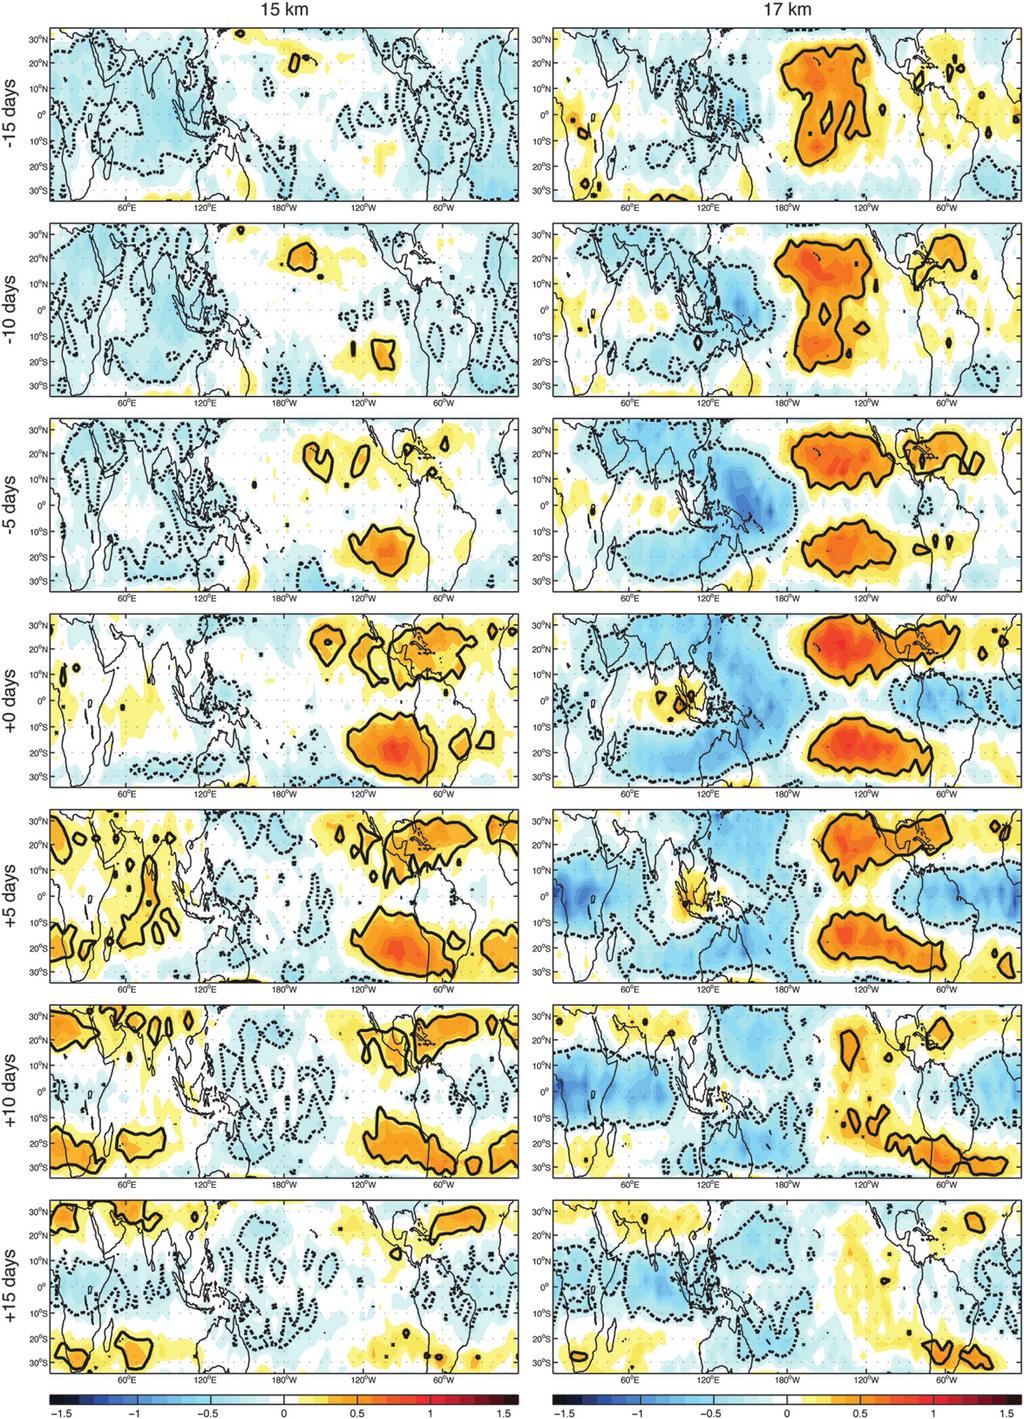 1090 JOURNAL OF THE ATMOSPHERIC SCIENCES VOLUME 70 FIG. 3. Lag regressions of pentad-mean COSMIC (left) 15- and (right) 17-km temperature anomalies on the EPWI time series.